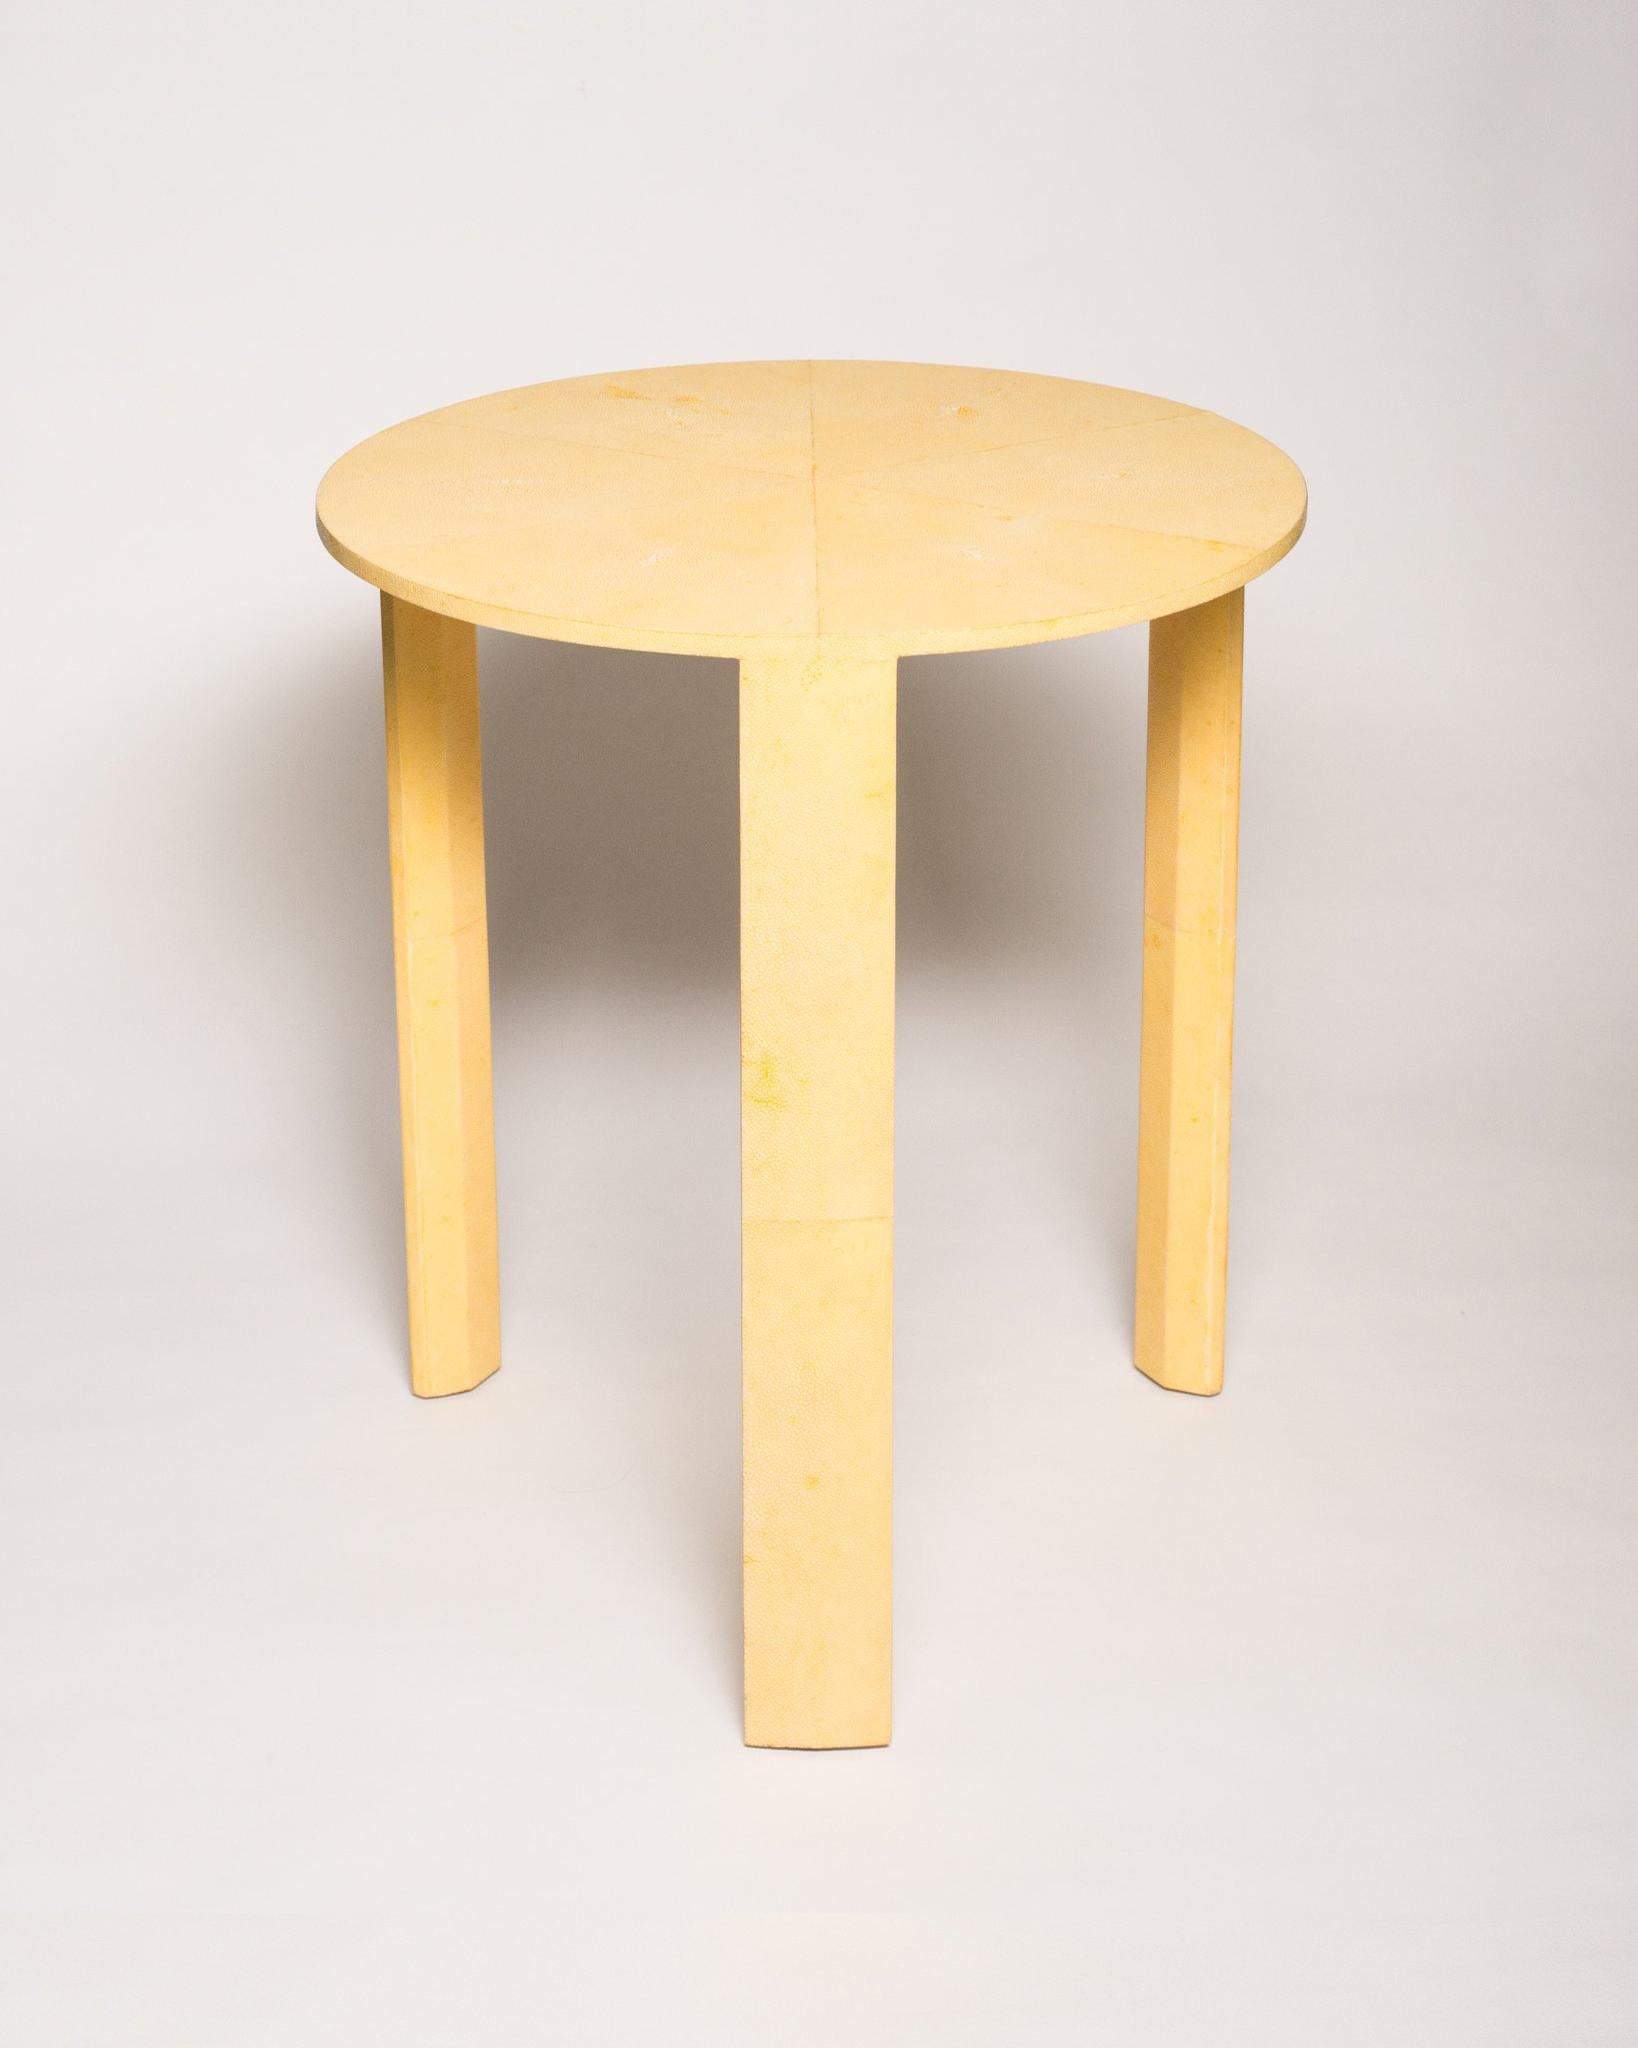 Brighten up your home with this canary yellow authentic Shagreen side table. In a monochromatic world of grey, this table will add that perfect pop of color that you’ve been looking for. This round table is exquisitely crafted with a veneer wood